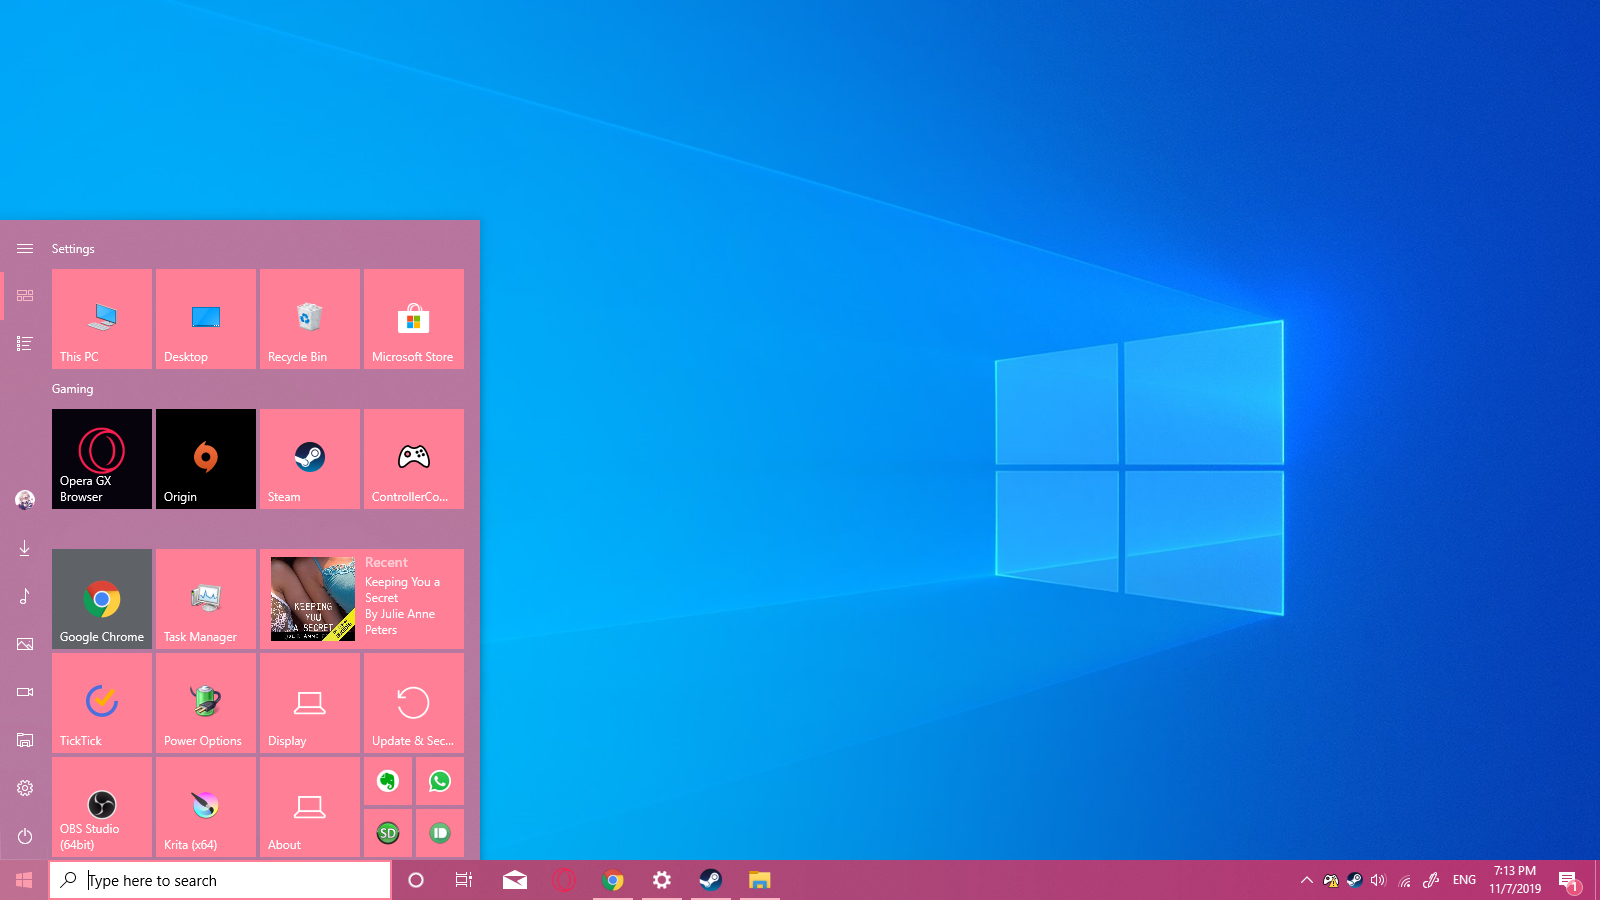 [Review] From Windows 7 to 10: Why You Will Love What Windows 10 Has To Offer.